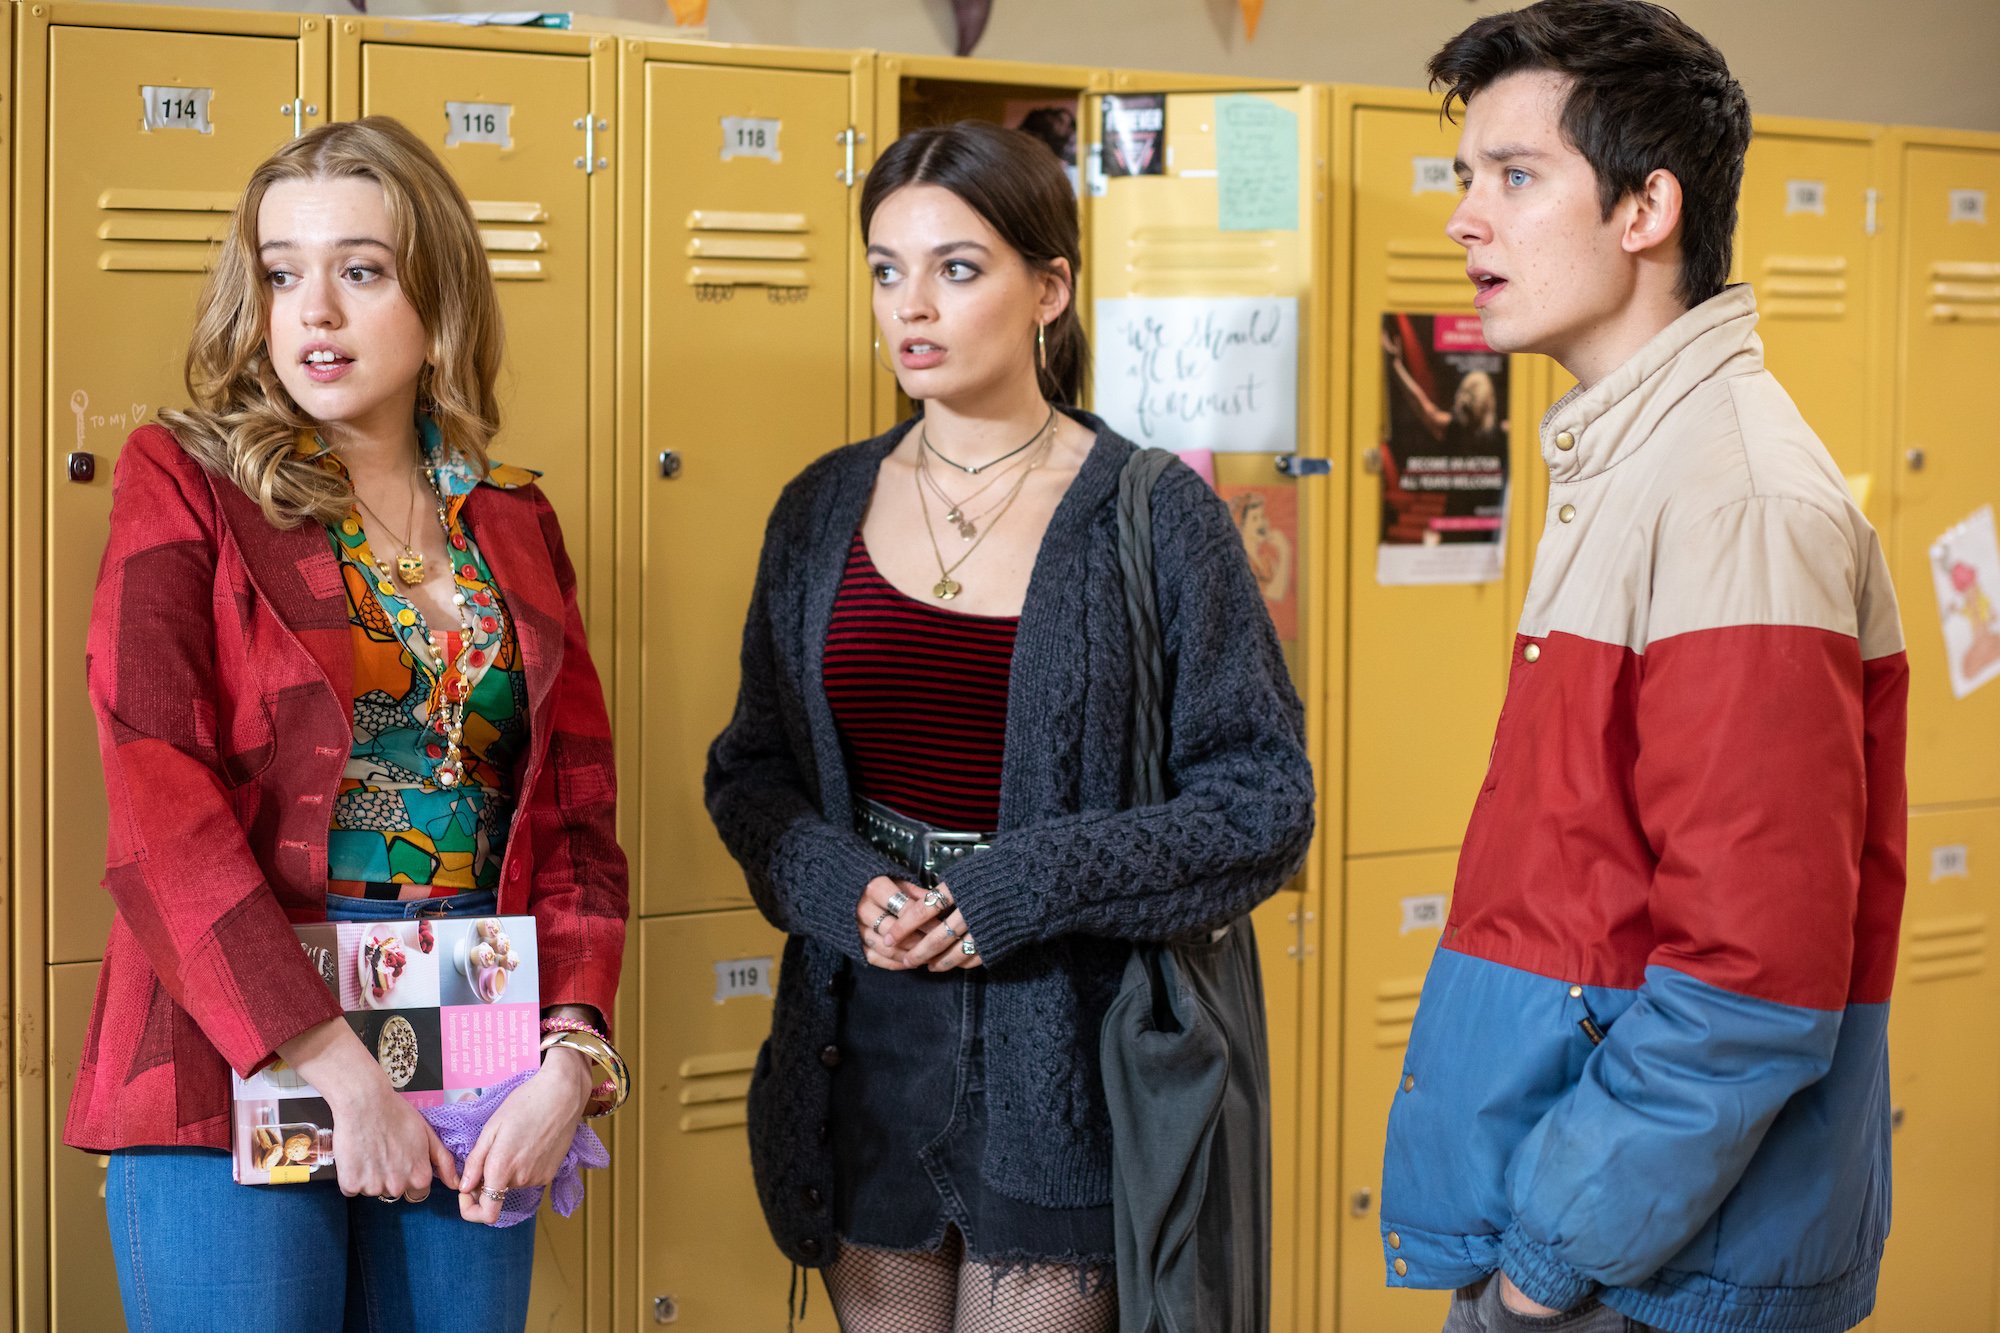 Aimee Lou Wood, Emma Mackey, and Asa Butterfield standing by yellow lockers in 'Sex Education' Season 2.